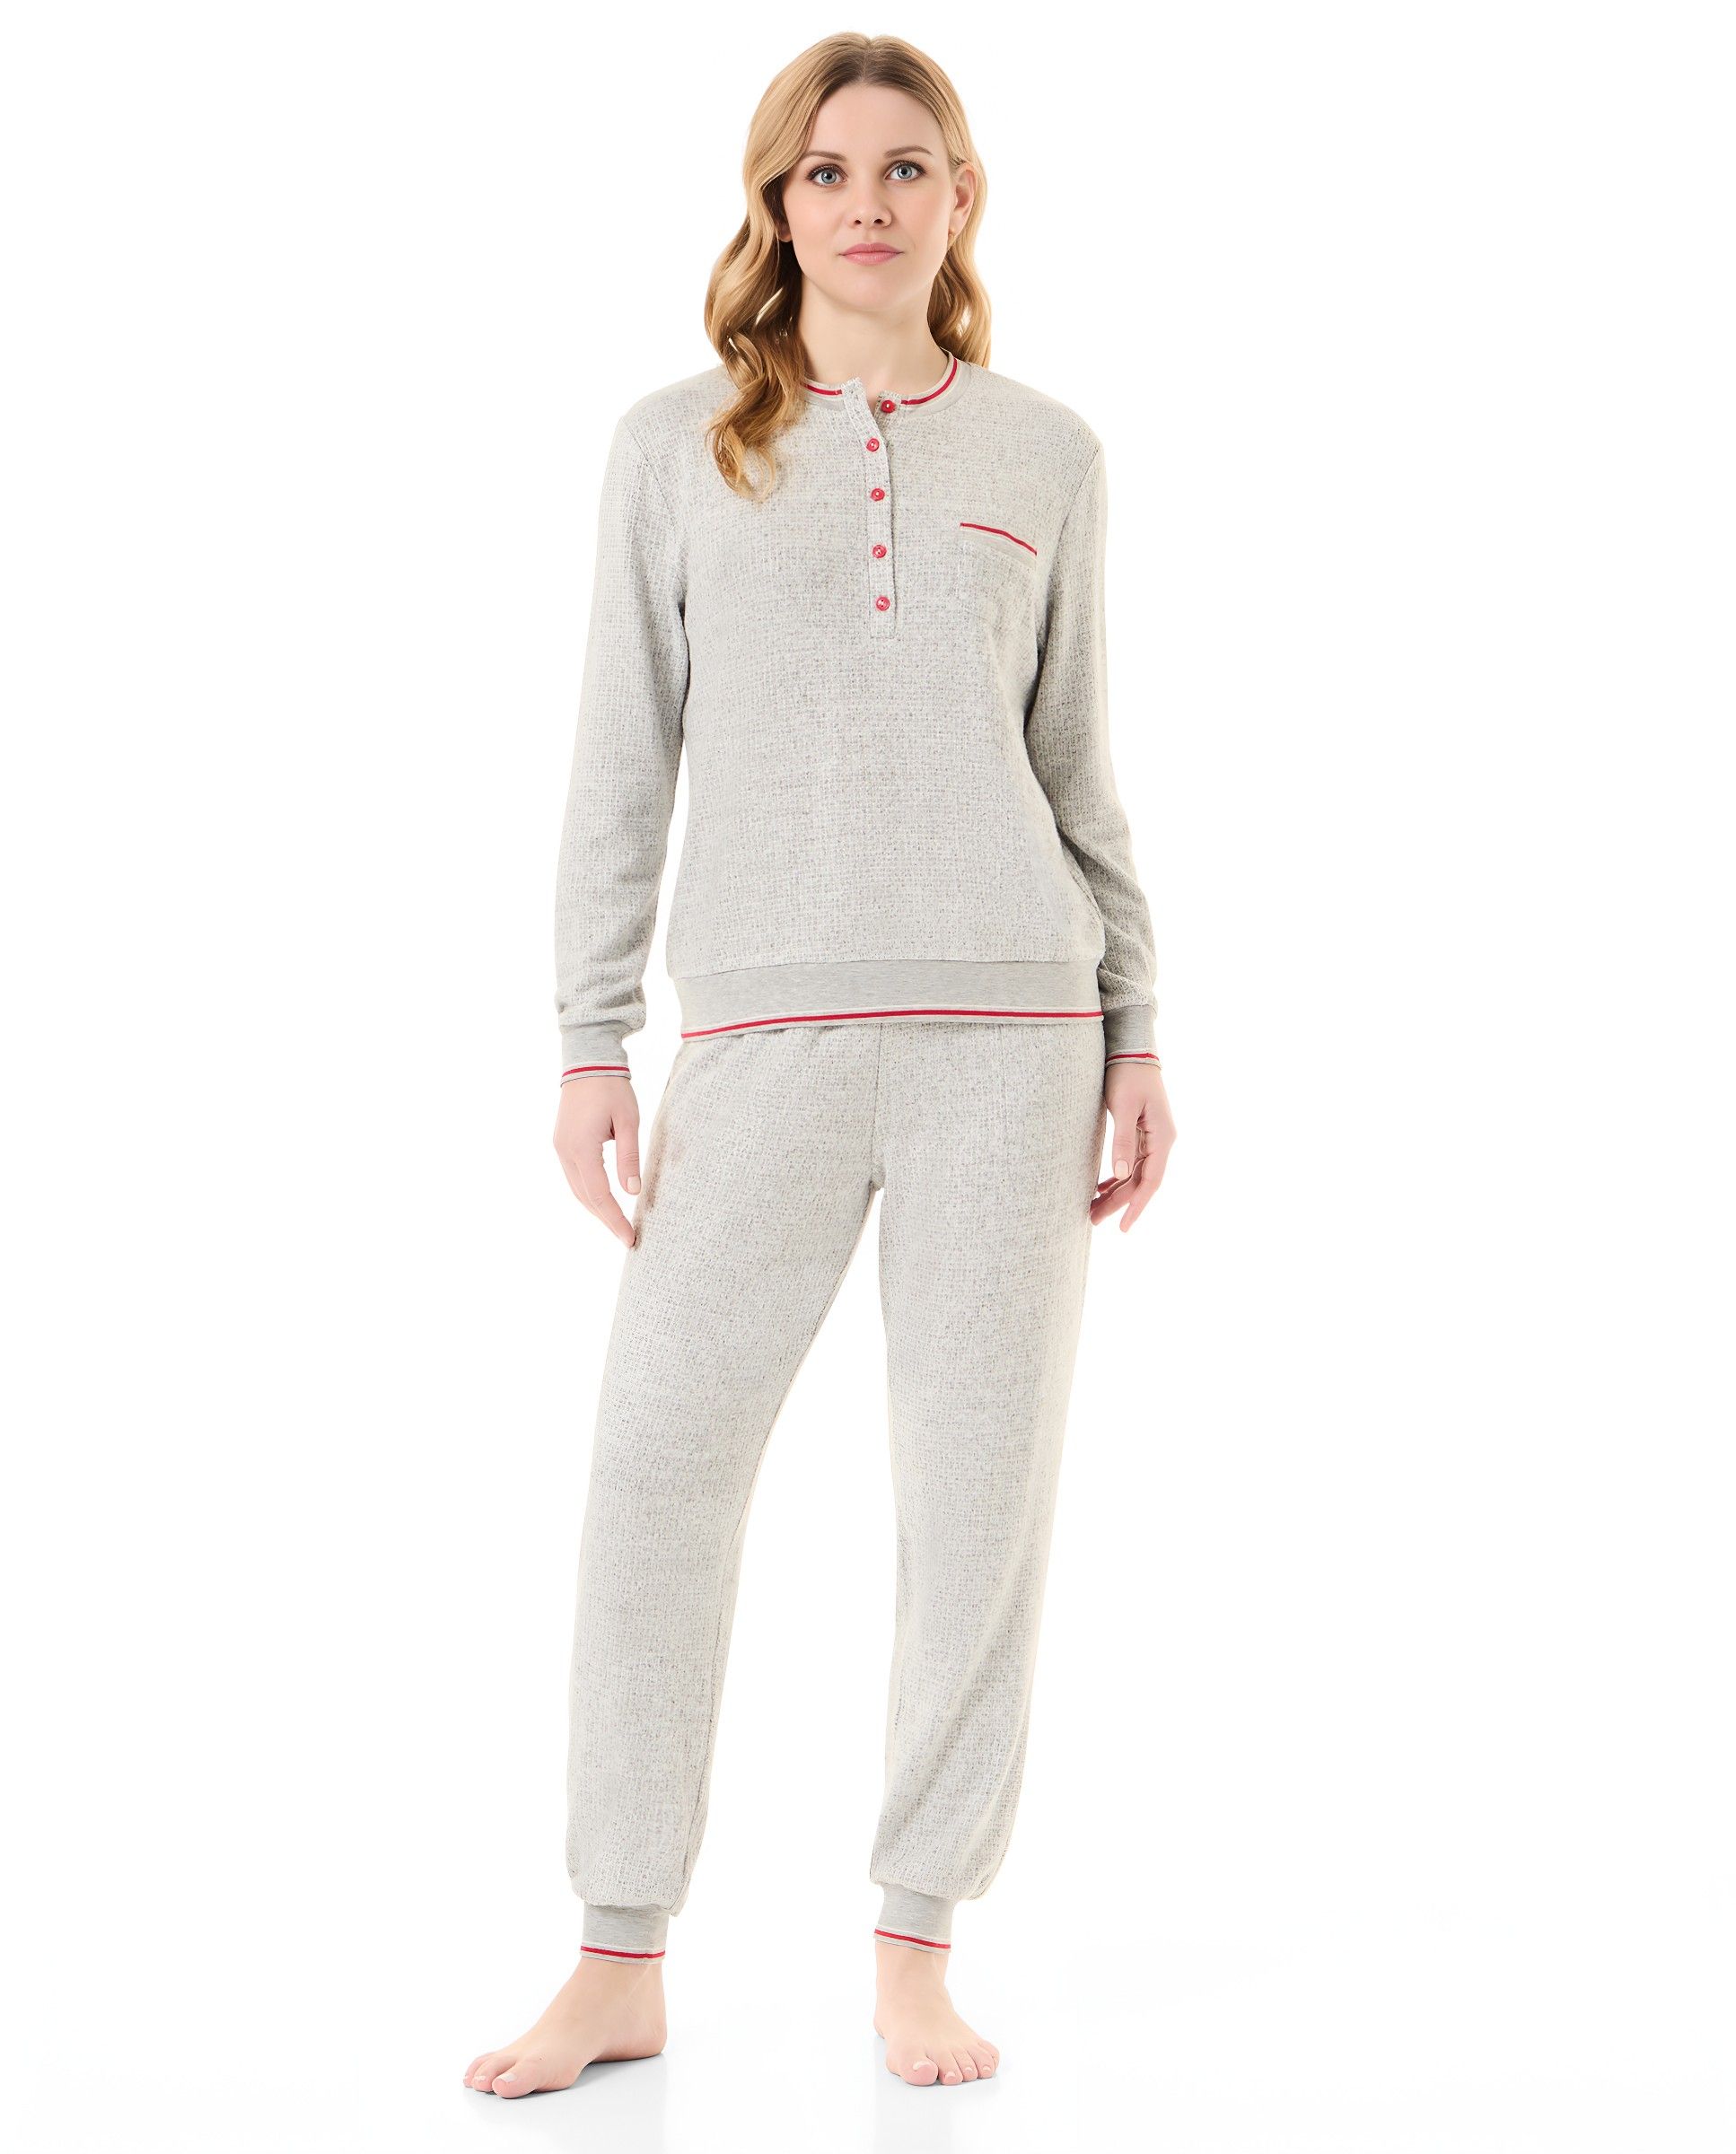 Women's long winter pyjamas with long-sleeved plain jacket, round neck with buttons, plain long trousers with cuffs.